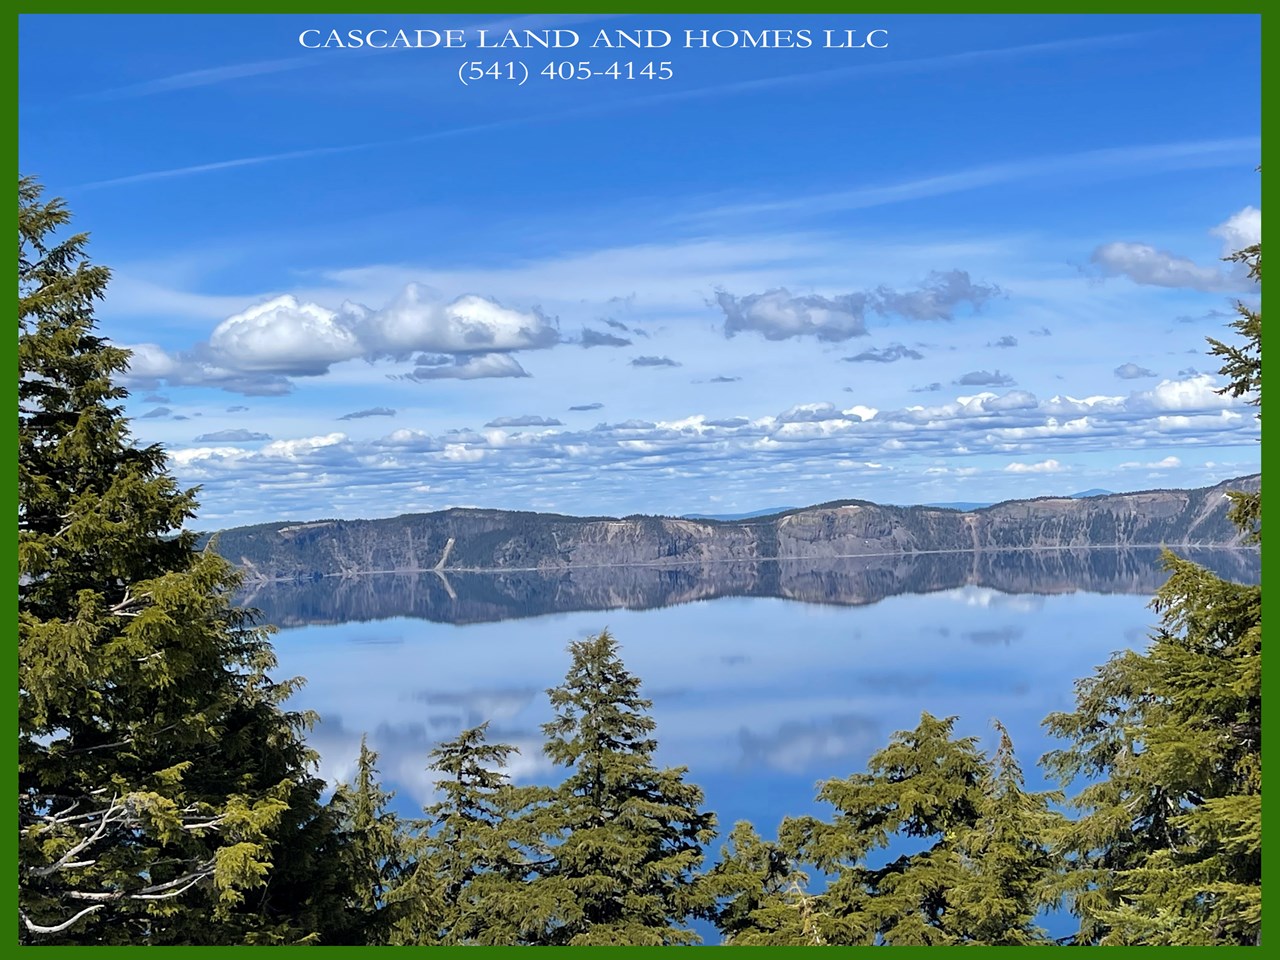 crater lake national park is about 45 minutes away! after you are done exploring this spectacular area, you can hike on the pacific crest trail from here that runs a total of 2,650 miles from mexico to canada through california, oregon and washington!